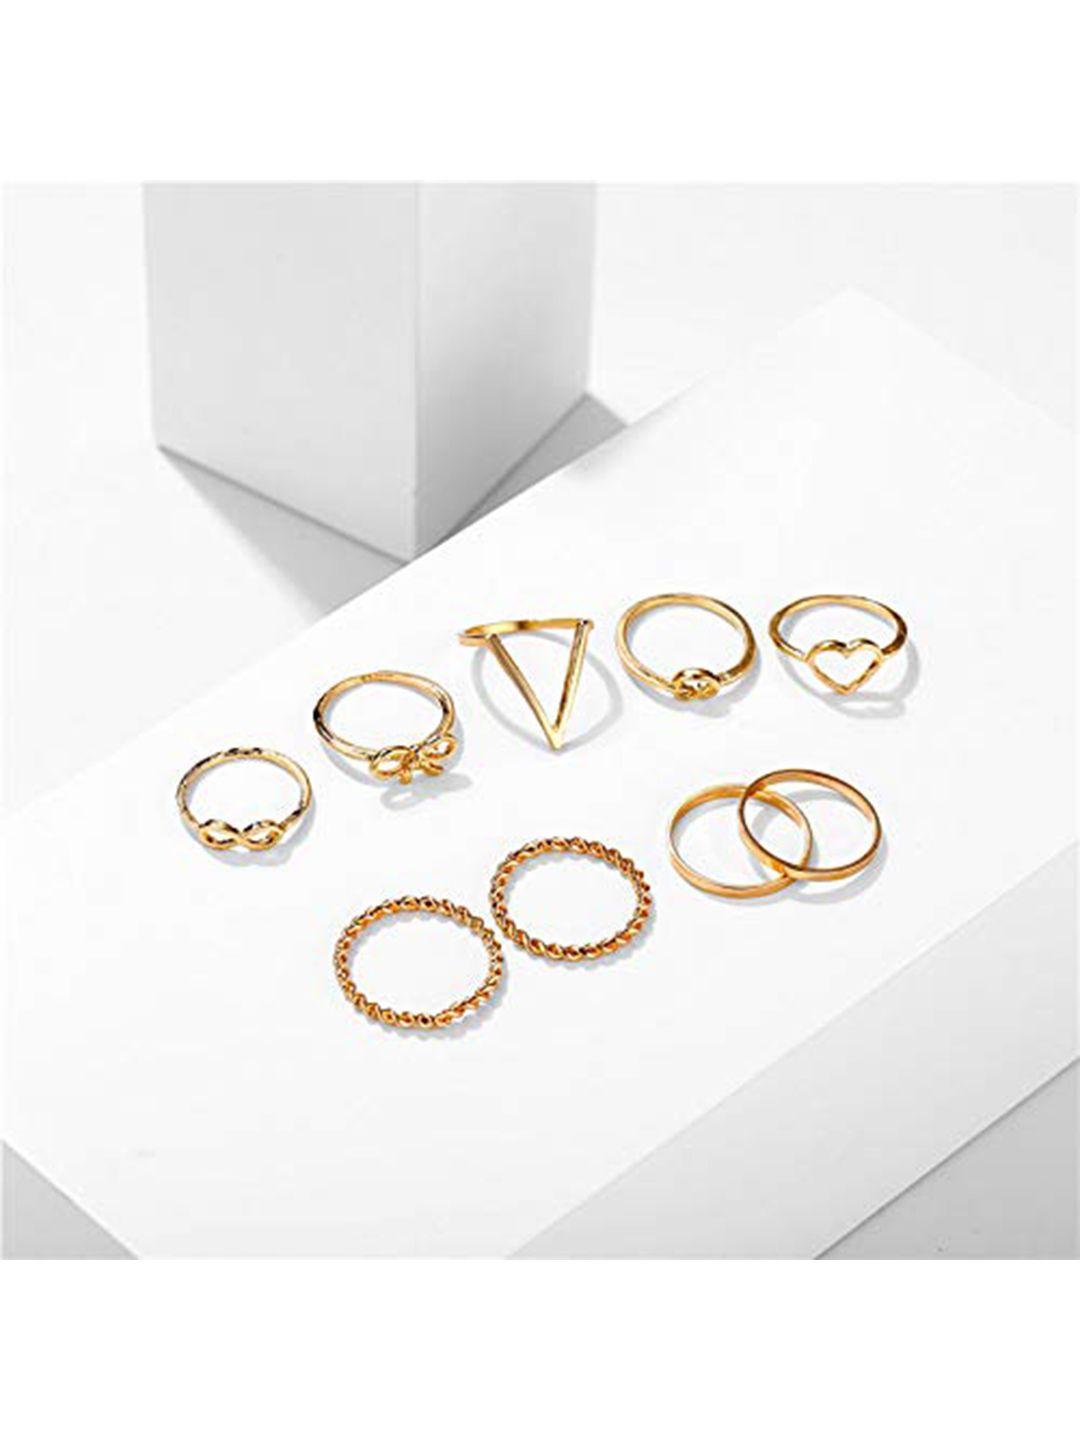 Vembley Set of 9 Gold-Plated CZ Studded Love Infinity Rings Price in India